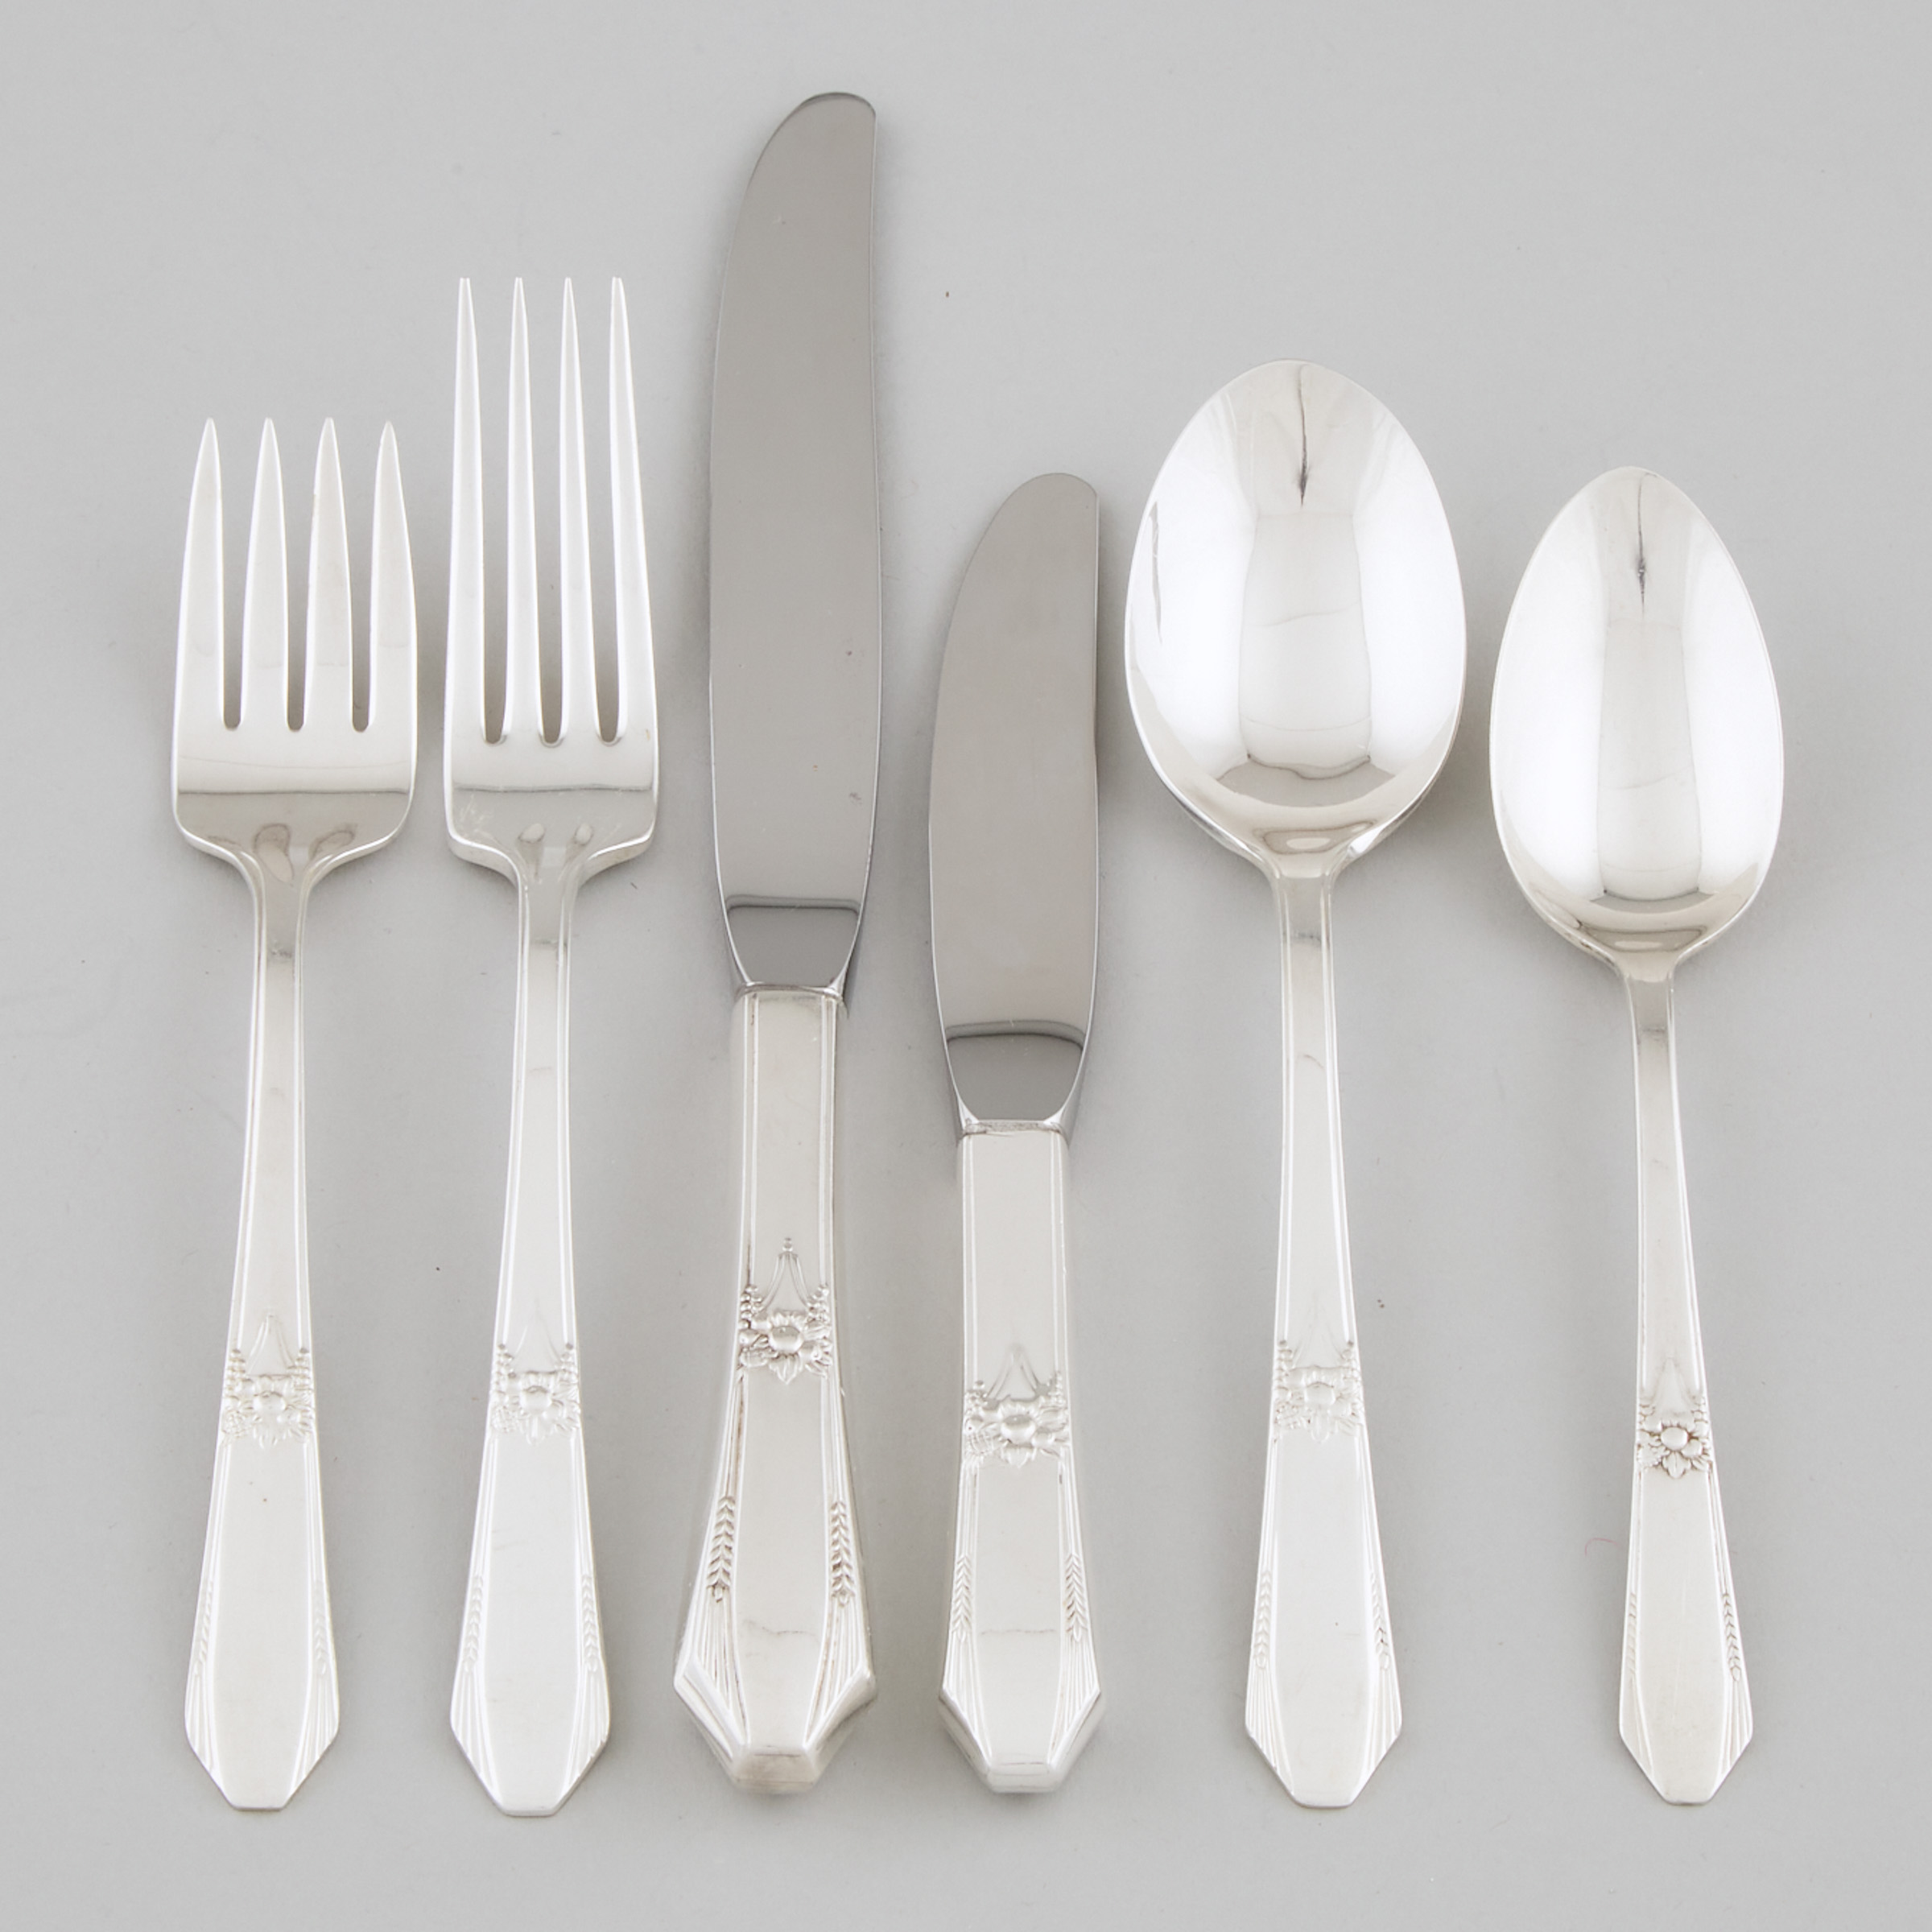 Canadian Silver 'Laurier' Pattern Flatware Service, Northumbria, 20th century